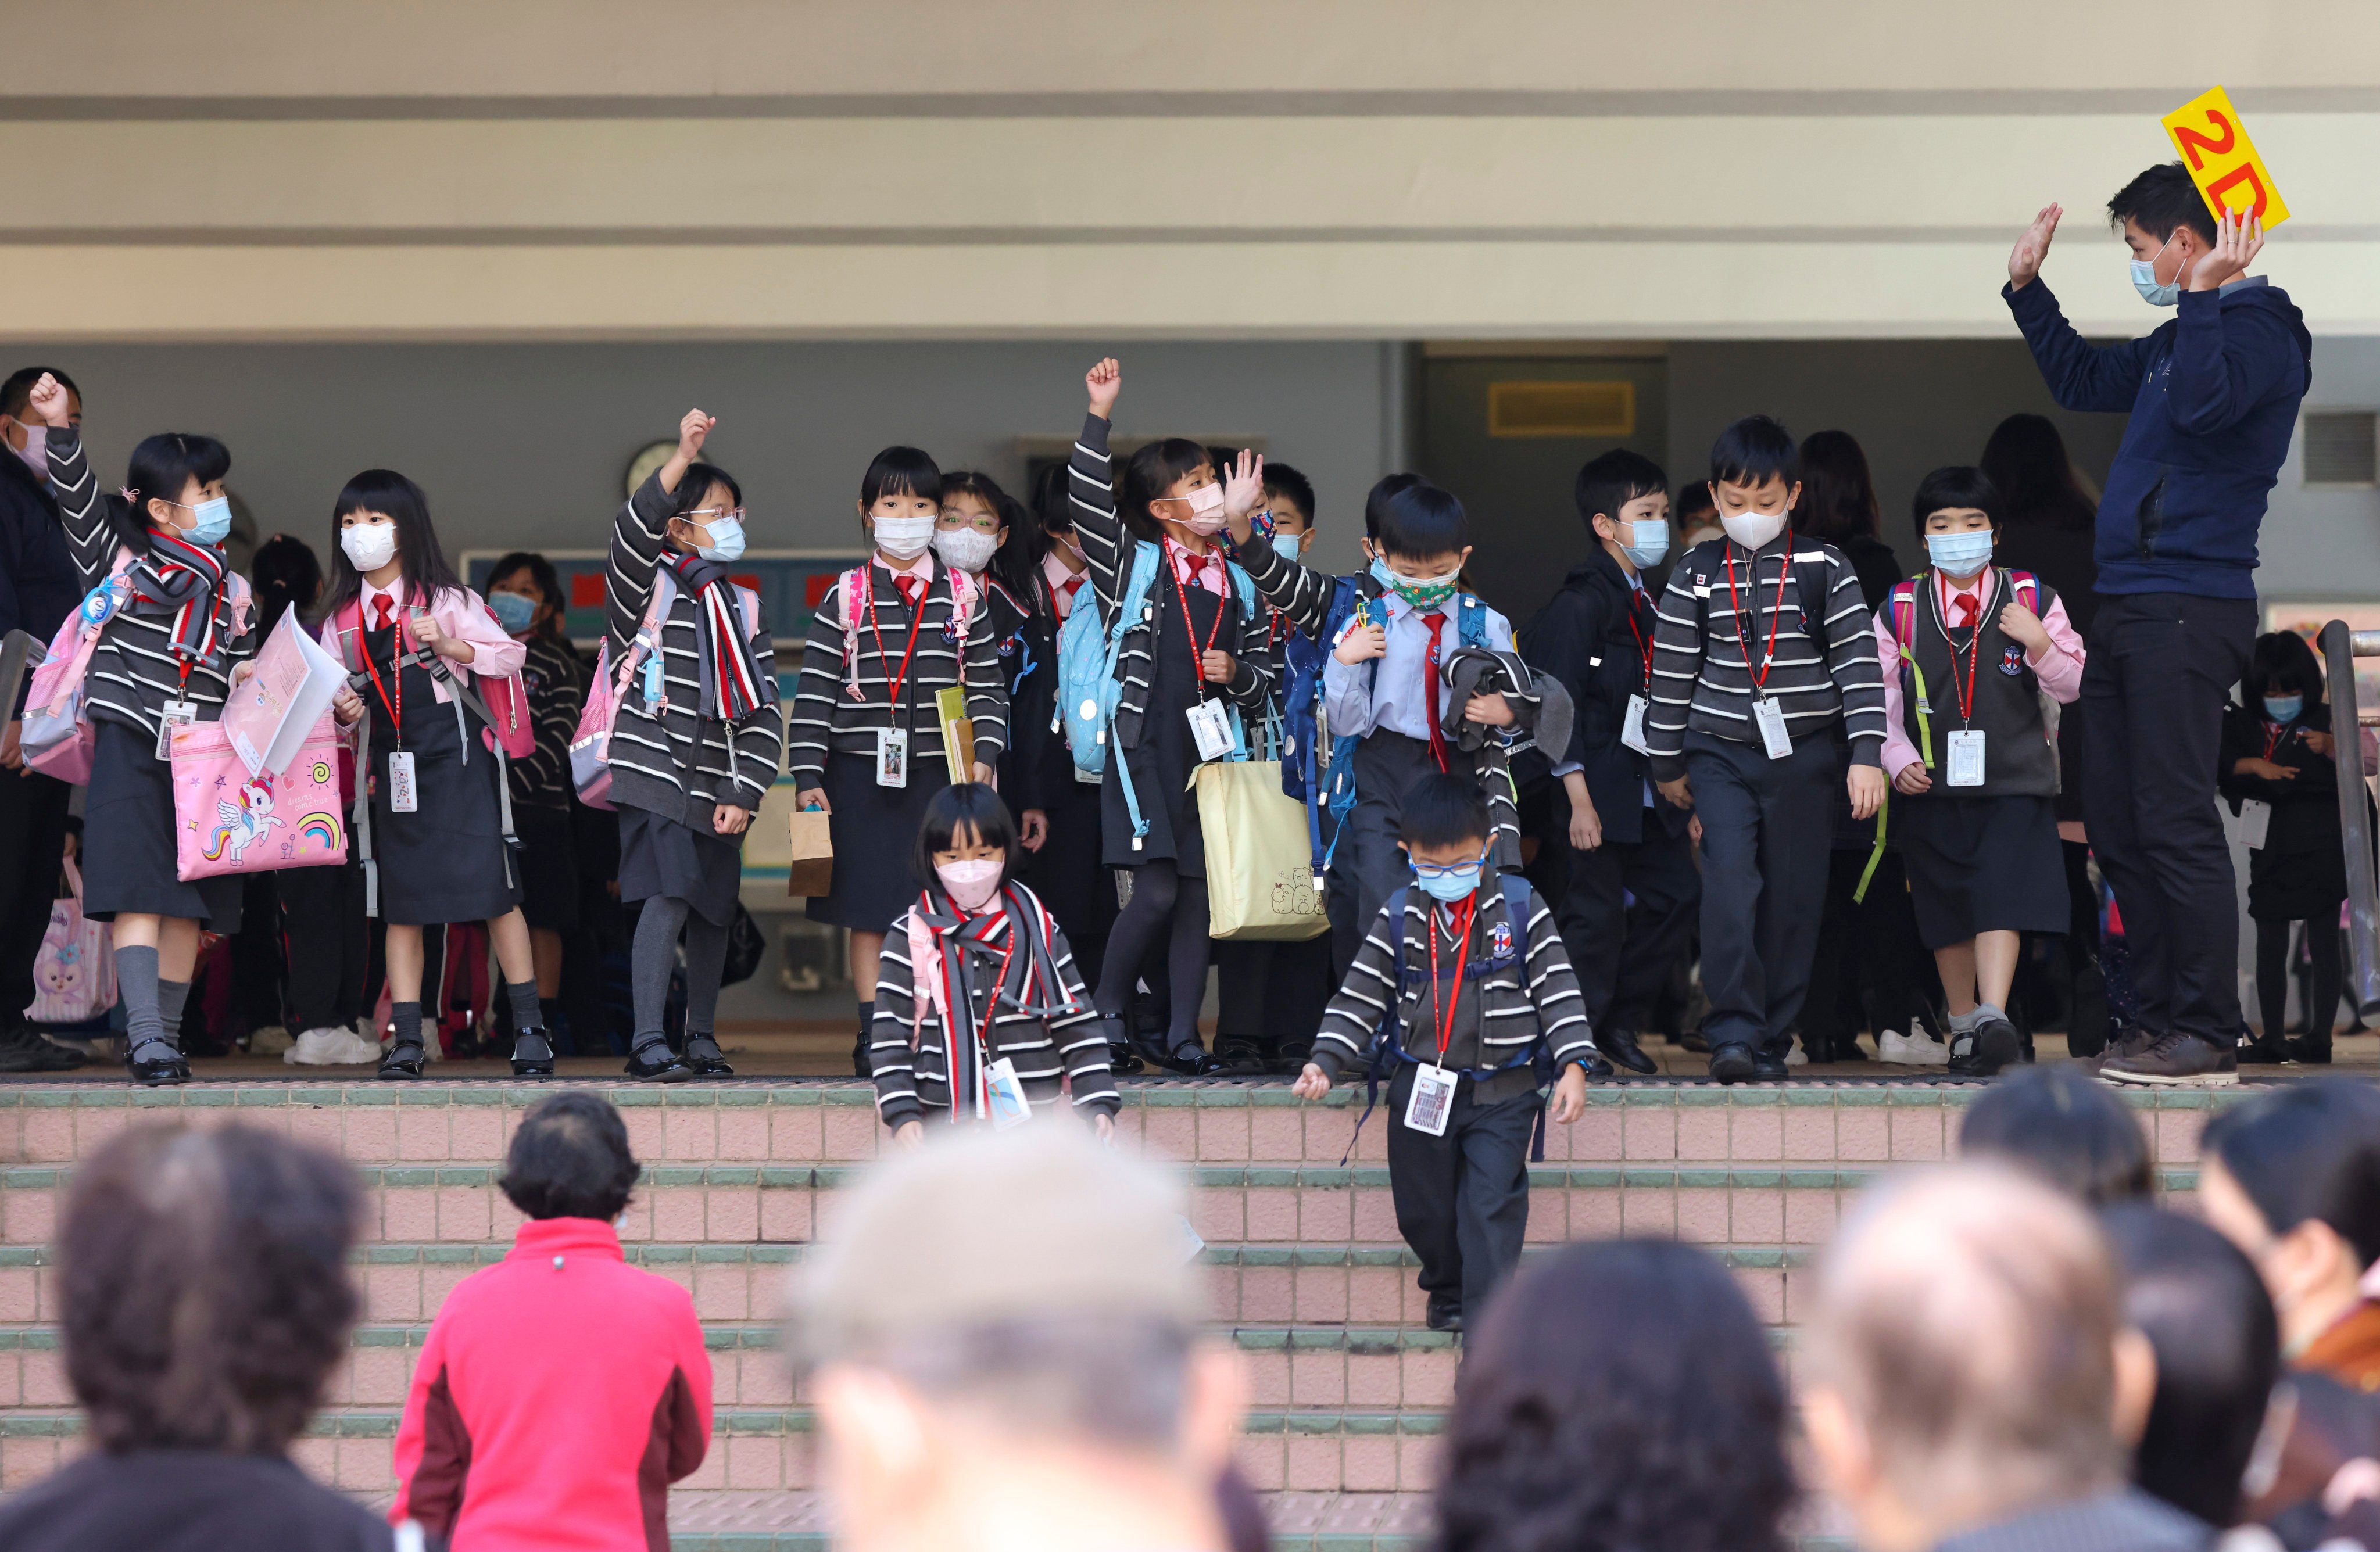 On average over the past nearly two decades, about six out of 10 students holding one-way permits went to primary schools and the rest went to secondary schools. Photo: Nora Tam